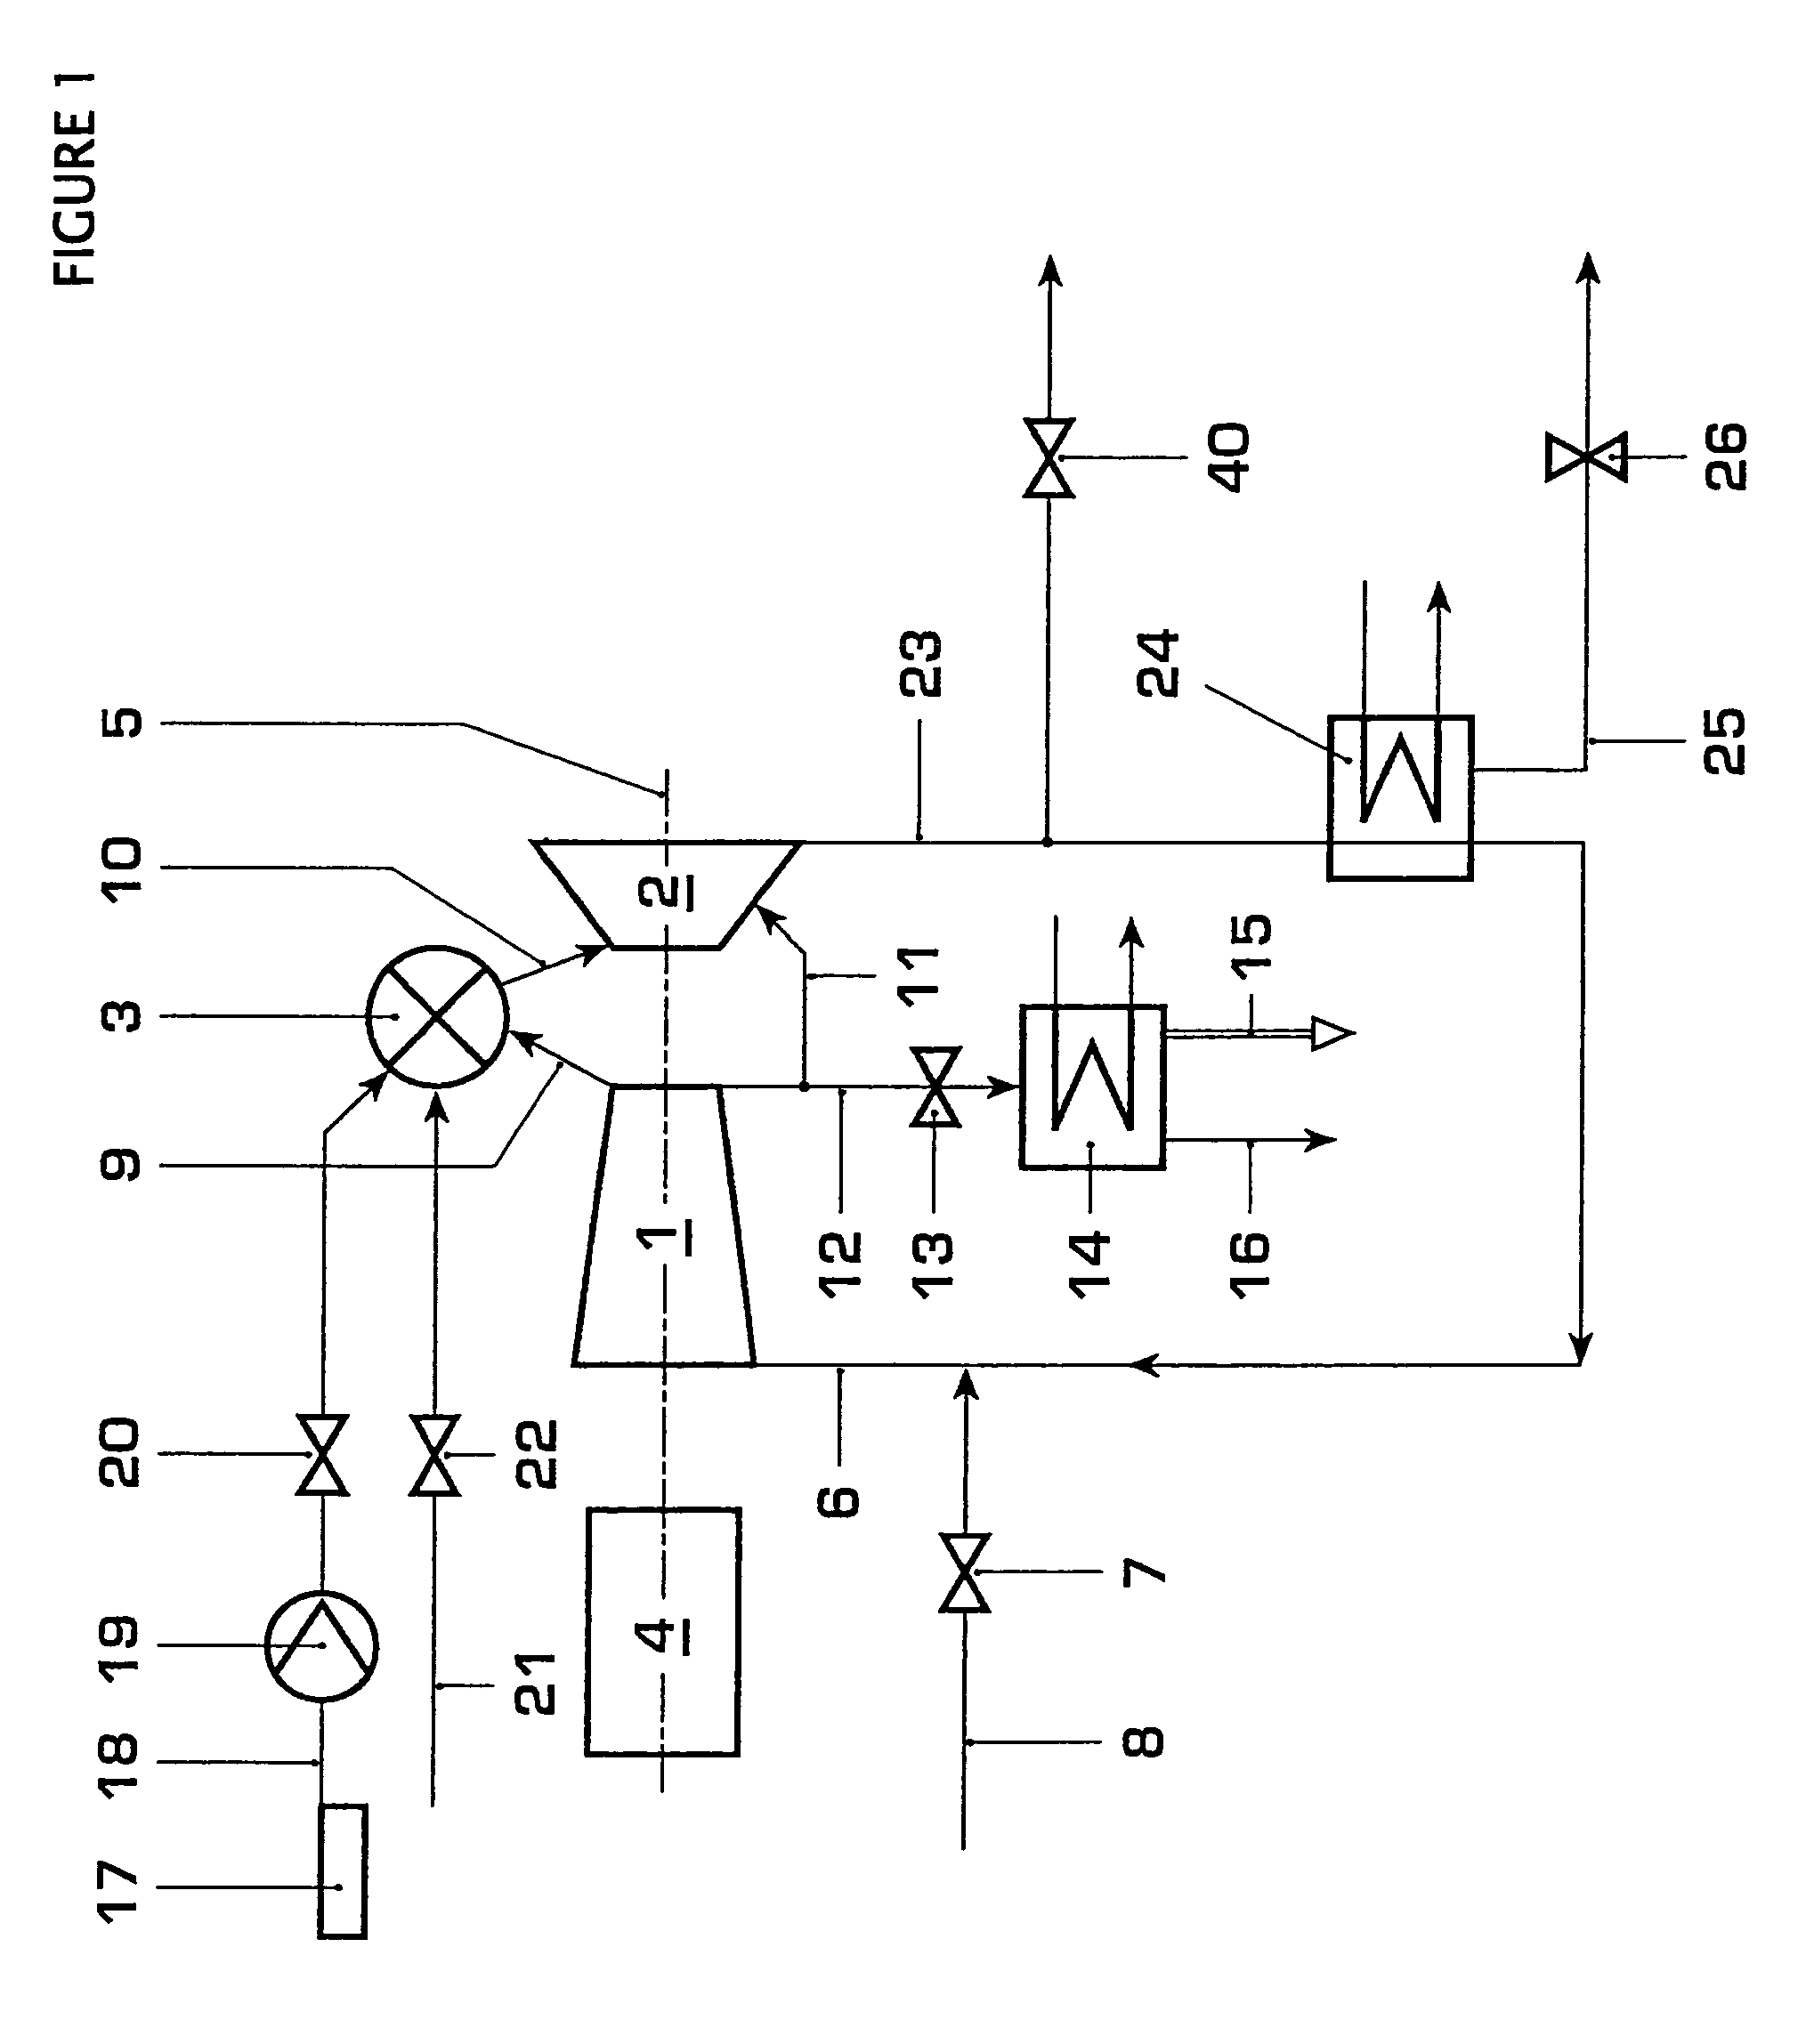 Method for operating a power plant by means of a CO2 process